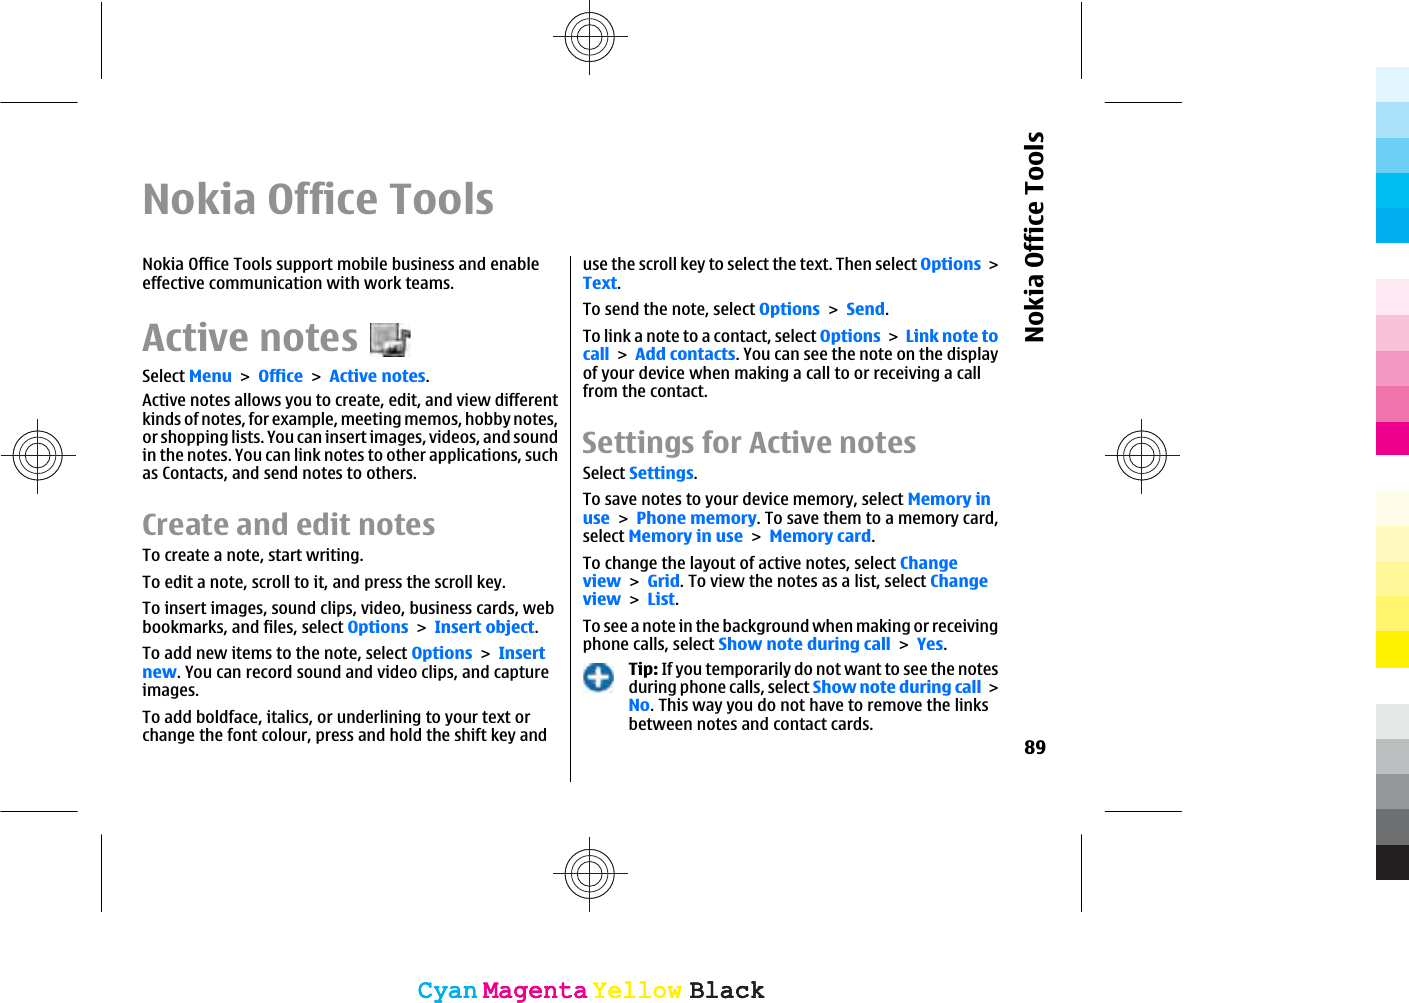 Nokia Office ToolsNokia Office Tools support mobile business and enableeffective communication with work teams.Active notesSelect MenuOfficeActive notes.Active notes allows you to create, edit, and view differentkinds of notes, for example, meeting memos, hobby notes,or shopping lists. You can insert images, videos, and soundin the notes. You can link notes to other applications, suchas Contacts, and send notes to others.Create and edit notes To create a note, start writing.To edit a note, scroll to it, and press the scroll key.To insert images, sound clips, video, business cards, webbookmarks, and files, select OptionsInsert object.To add new items to the note, select OptionsInsertnew. You can record sound and video clips, and captureimages.To add boldface, italics, or underlining to your text orchange the font colour, press and hold the shift key anduse the scroll key to select the text. Then select OptionsText.To send the note, select OptionsSend.To link a note to a contact, select OptionsLink note tocallAdd contacts. You can see the note on the displayof your device when making a call to or receiving a callfrom the contact.Settings for Active notesSelect Settings.To save notes to your device memory, select Memory inusePhone memory. To save them to a memory card,select Memory in useMemory card.To change the layout of active notes, select ChangeviewGrid. To view the notes as a list, select ChangeviewList.To see a note in the background when making or receivingphone calls, select Show note during callYes.Tip: If you temporarily do not want to see the notesduring phone calls, select Show note during callNo. This way you do not have to remove the linksbetween notes and contact cards.89Nokia Office ToolsCyanCyanMagentaMagentaYellowYellowBlackBlackCyanCyanMagentaMagentaYellowYellowBlackBlack